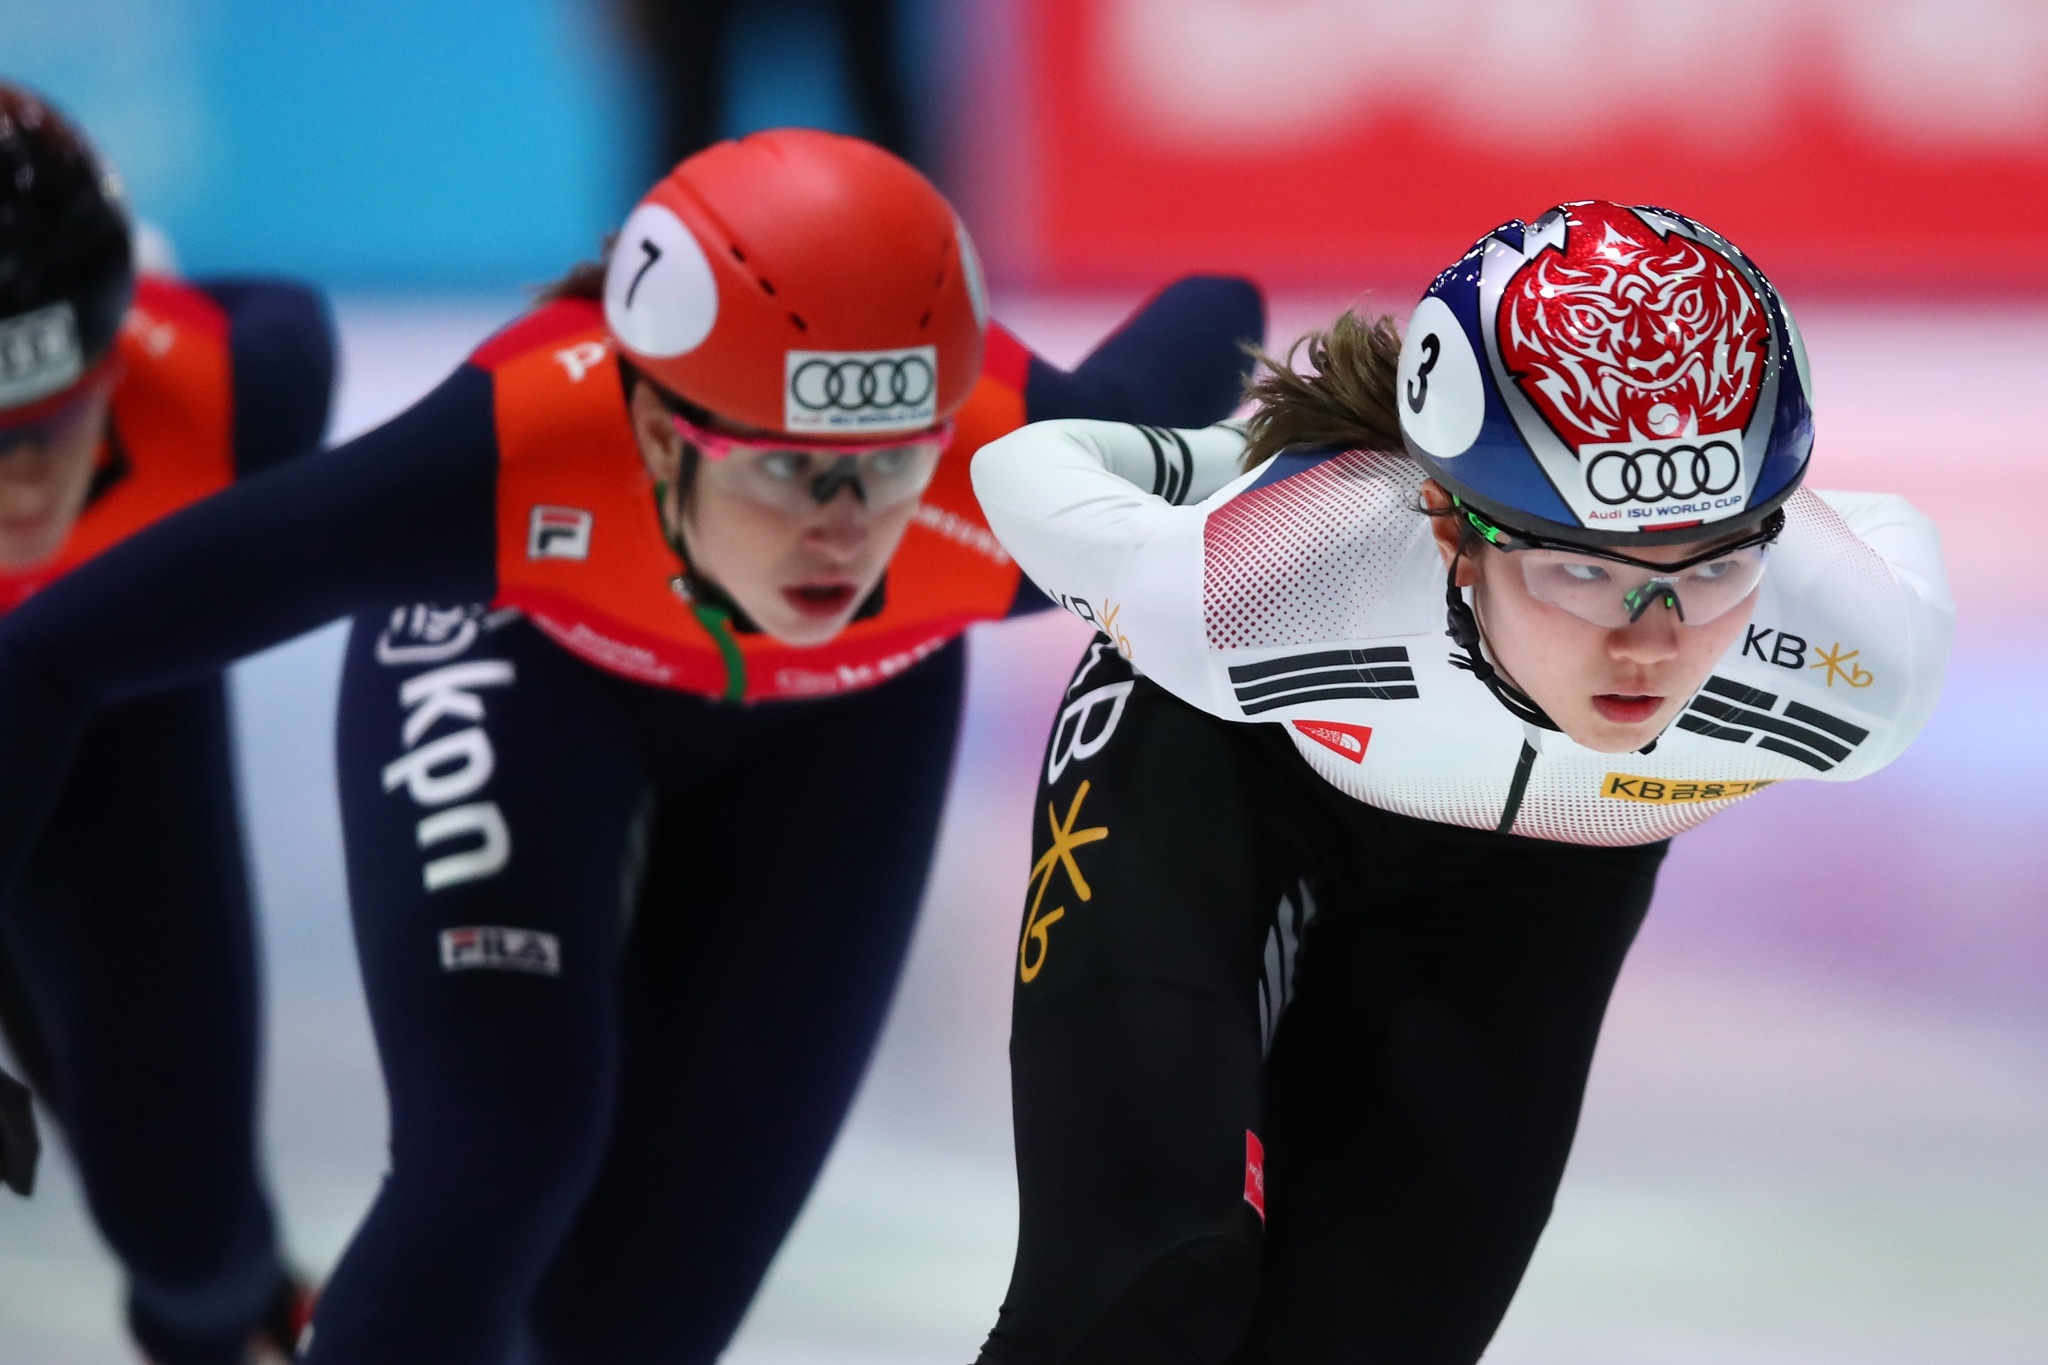 Olympic 1,000m bronze medallist Shim Suk-hee was among the South Korean women to qualify for the quarter-finals of the ISU Short Track World Cup in Shanghai ©Getty Images